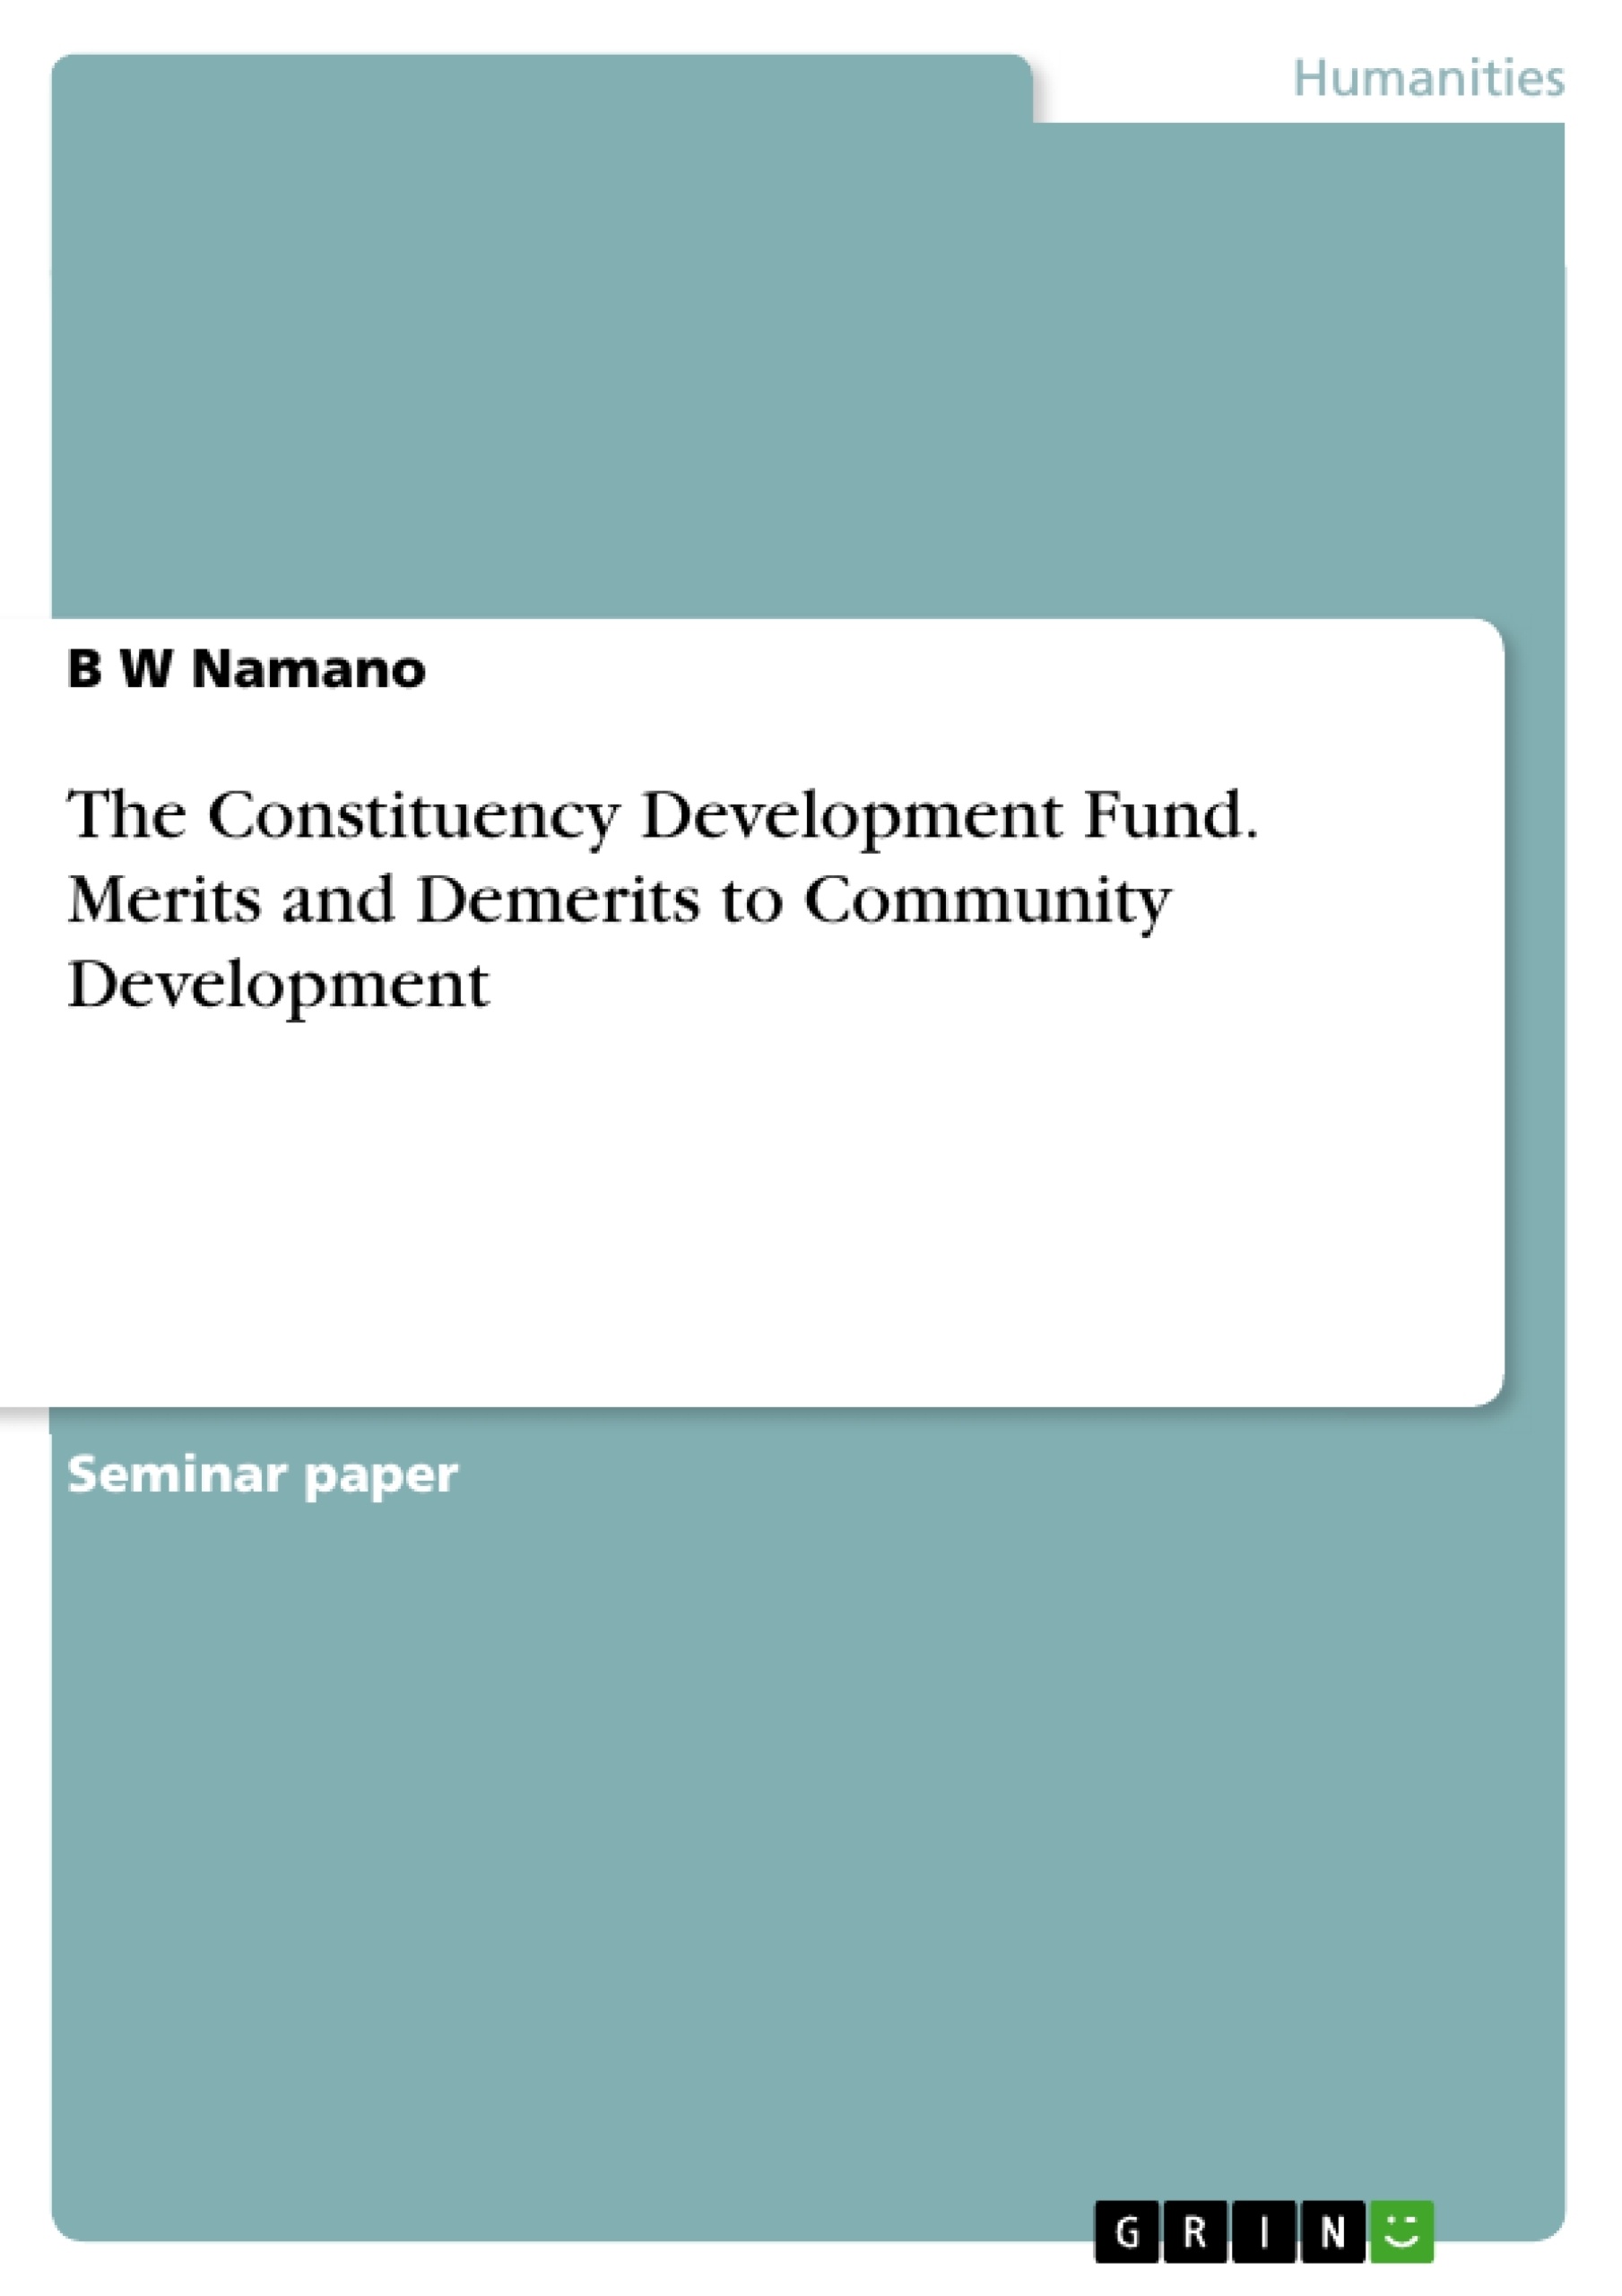 Title: The Constituency Development Fund. Merits and Demerits to Community Development